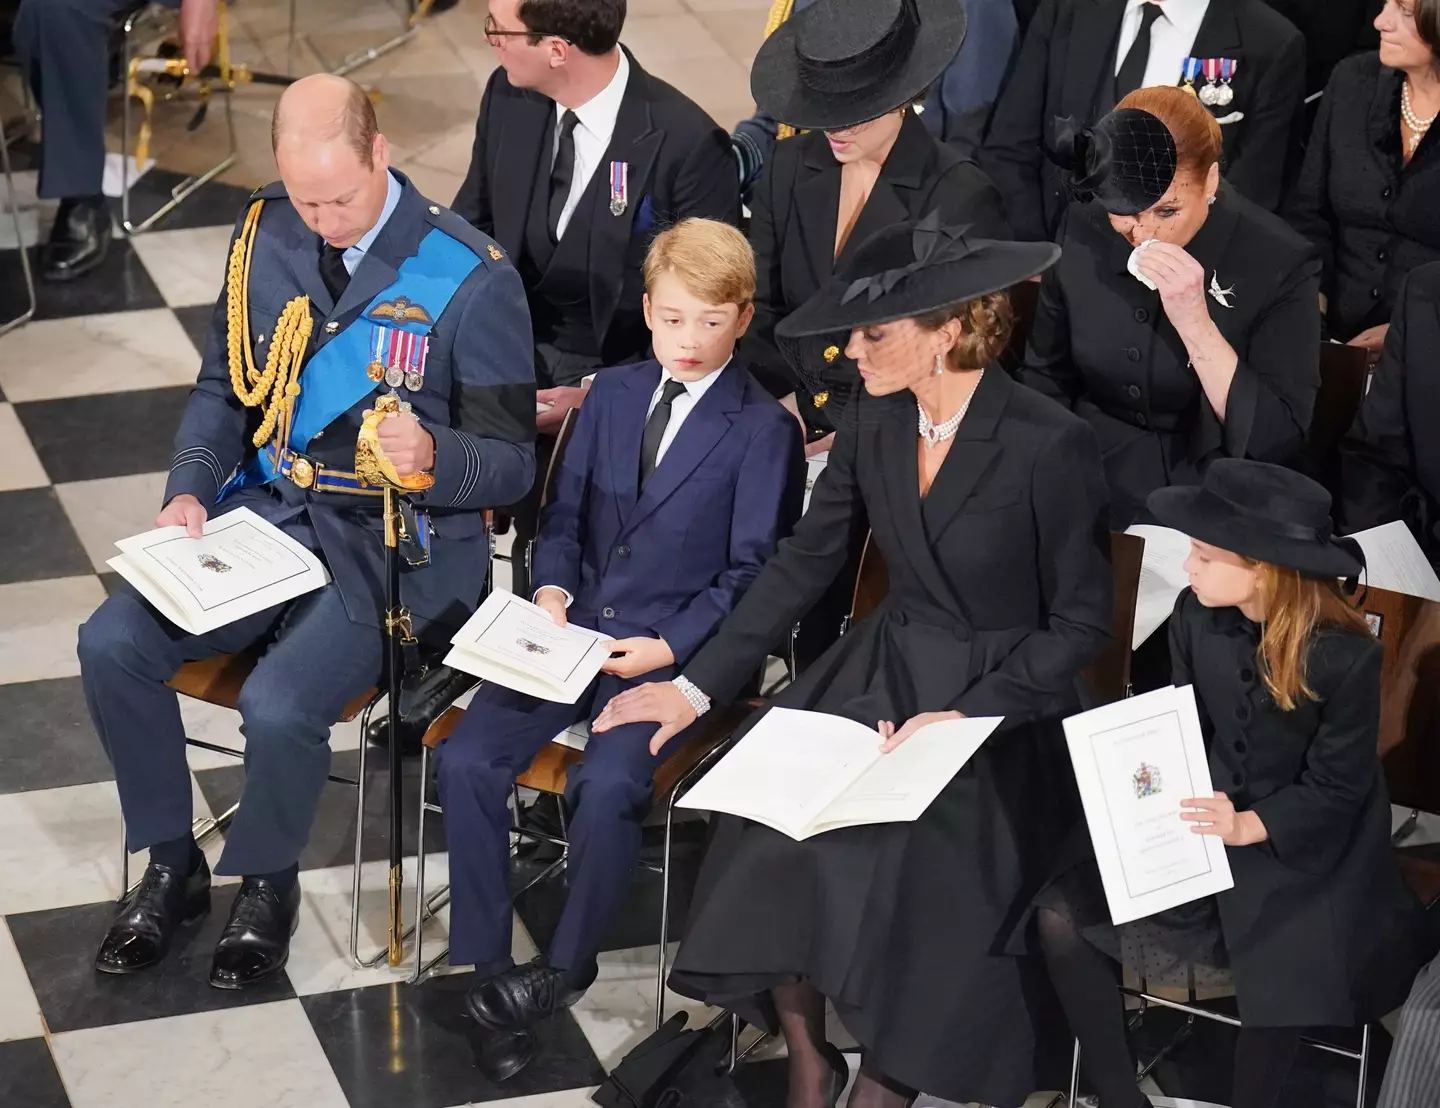 Kate comforts George during the service.